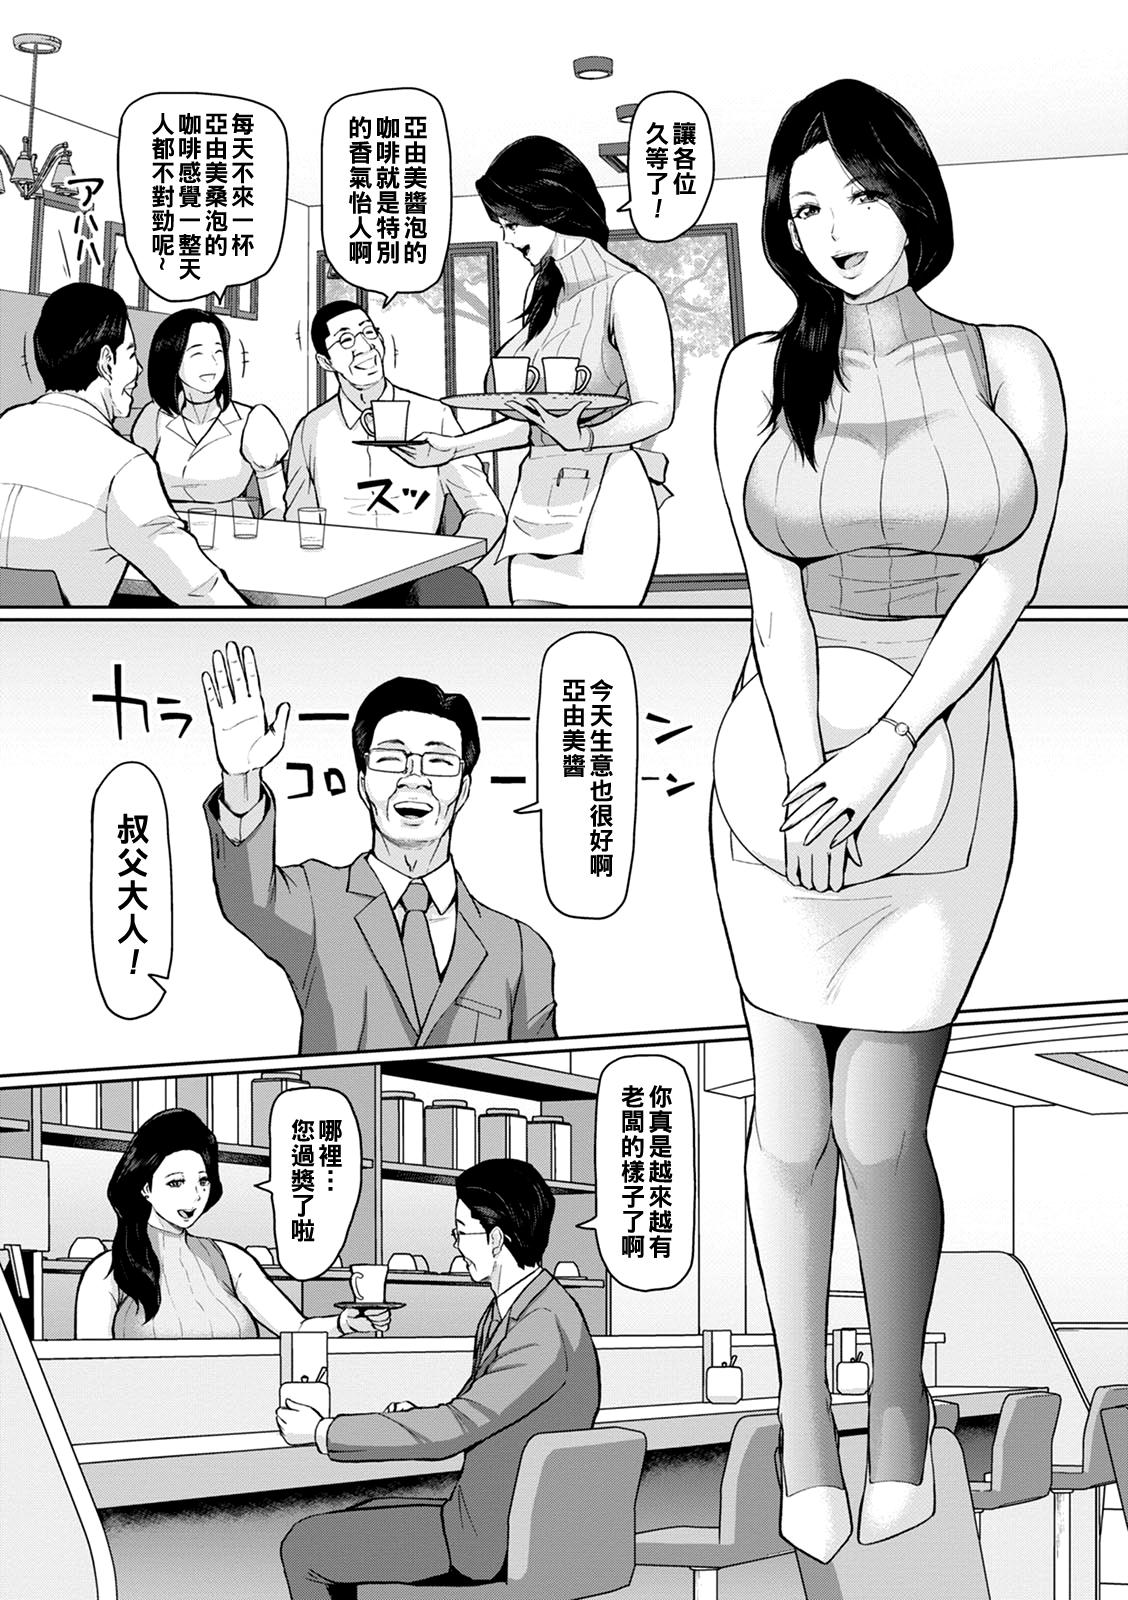 Gay Bus 淫姦オークション 前編（Chinese） Cash - Page 2